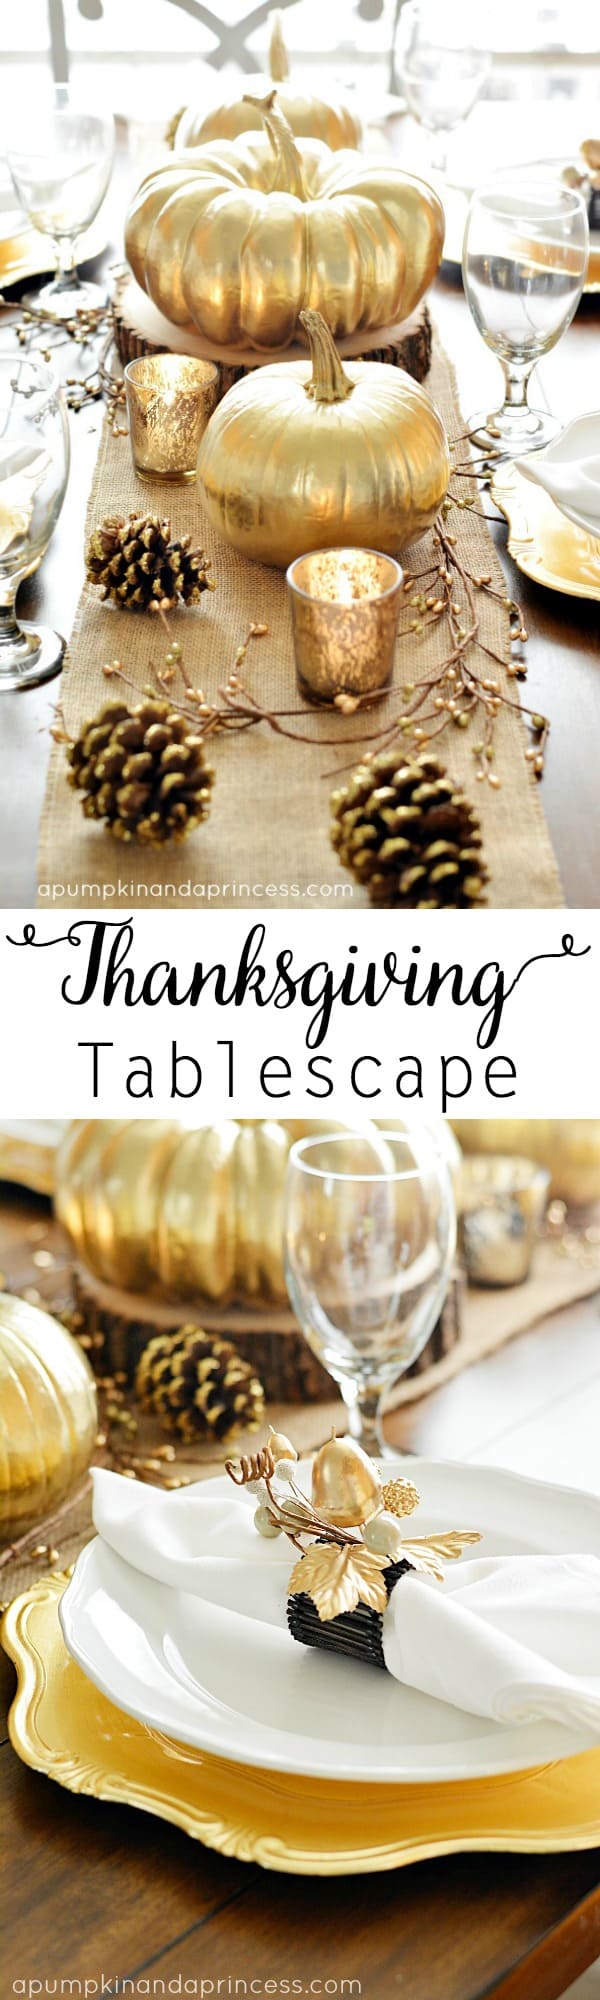 Painted Gold Thanksgiving Table Decor Idea